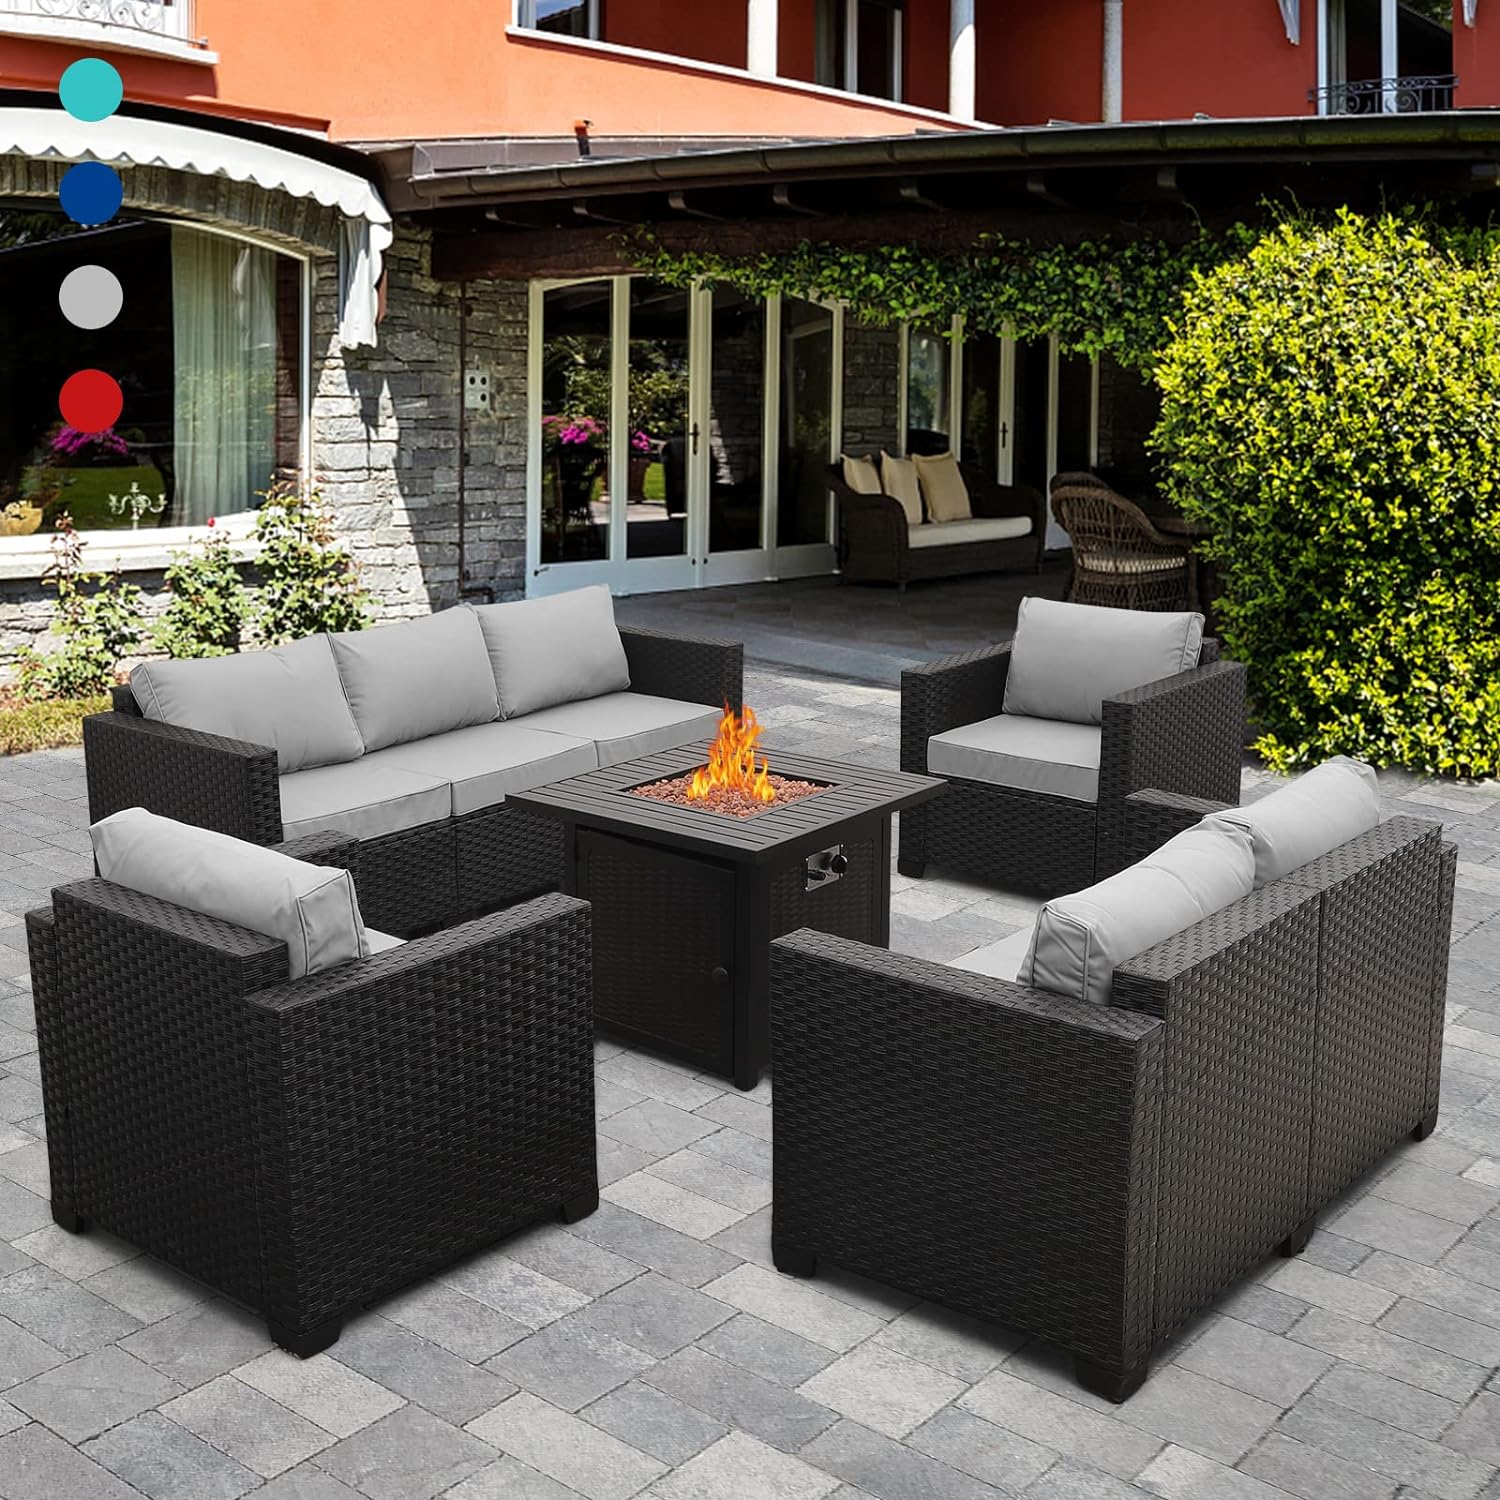 Patio Furniture Sectional Sofa 5-Piece 50000 BTU Propane Gas Fire Pit OutdoorWickerFurniture Set Square Steel Pit Table with No-Slip Cushions Furniture Covers Lava Rock Anti-Splash Mesh, Grey